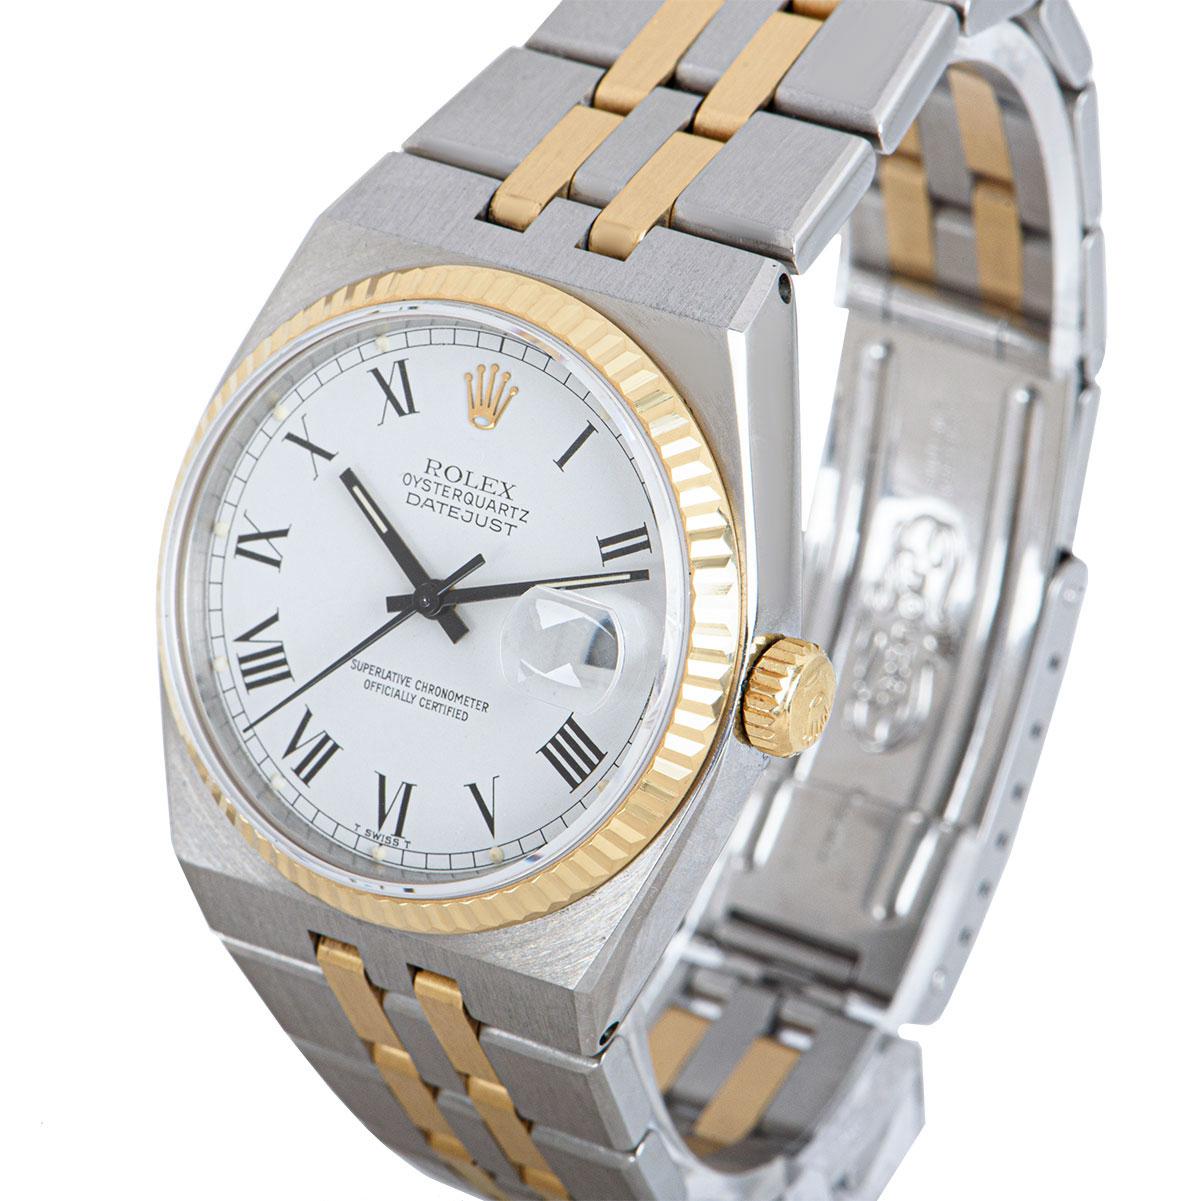 A 36 mm Stainless Steel and 18k Yellow Gold Oysterquartz Datejust Gents Wristwatch, silver dial with applied hour markers, date at 3 0'clock, a fixed 18k yellow gold fluted bezel, a stainless steel and 18k yellow gold oysterquartz bracelet with a